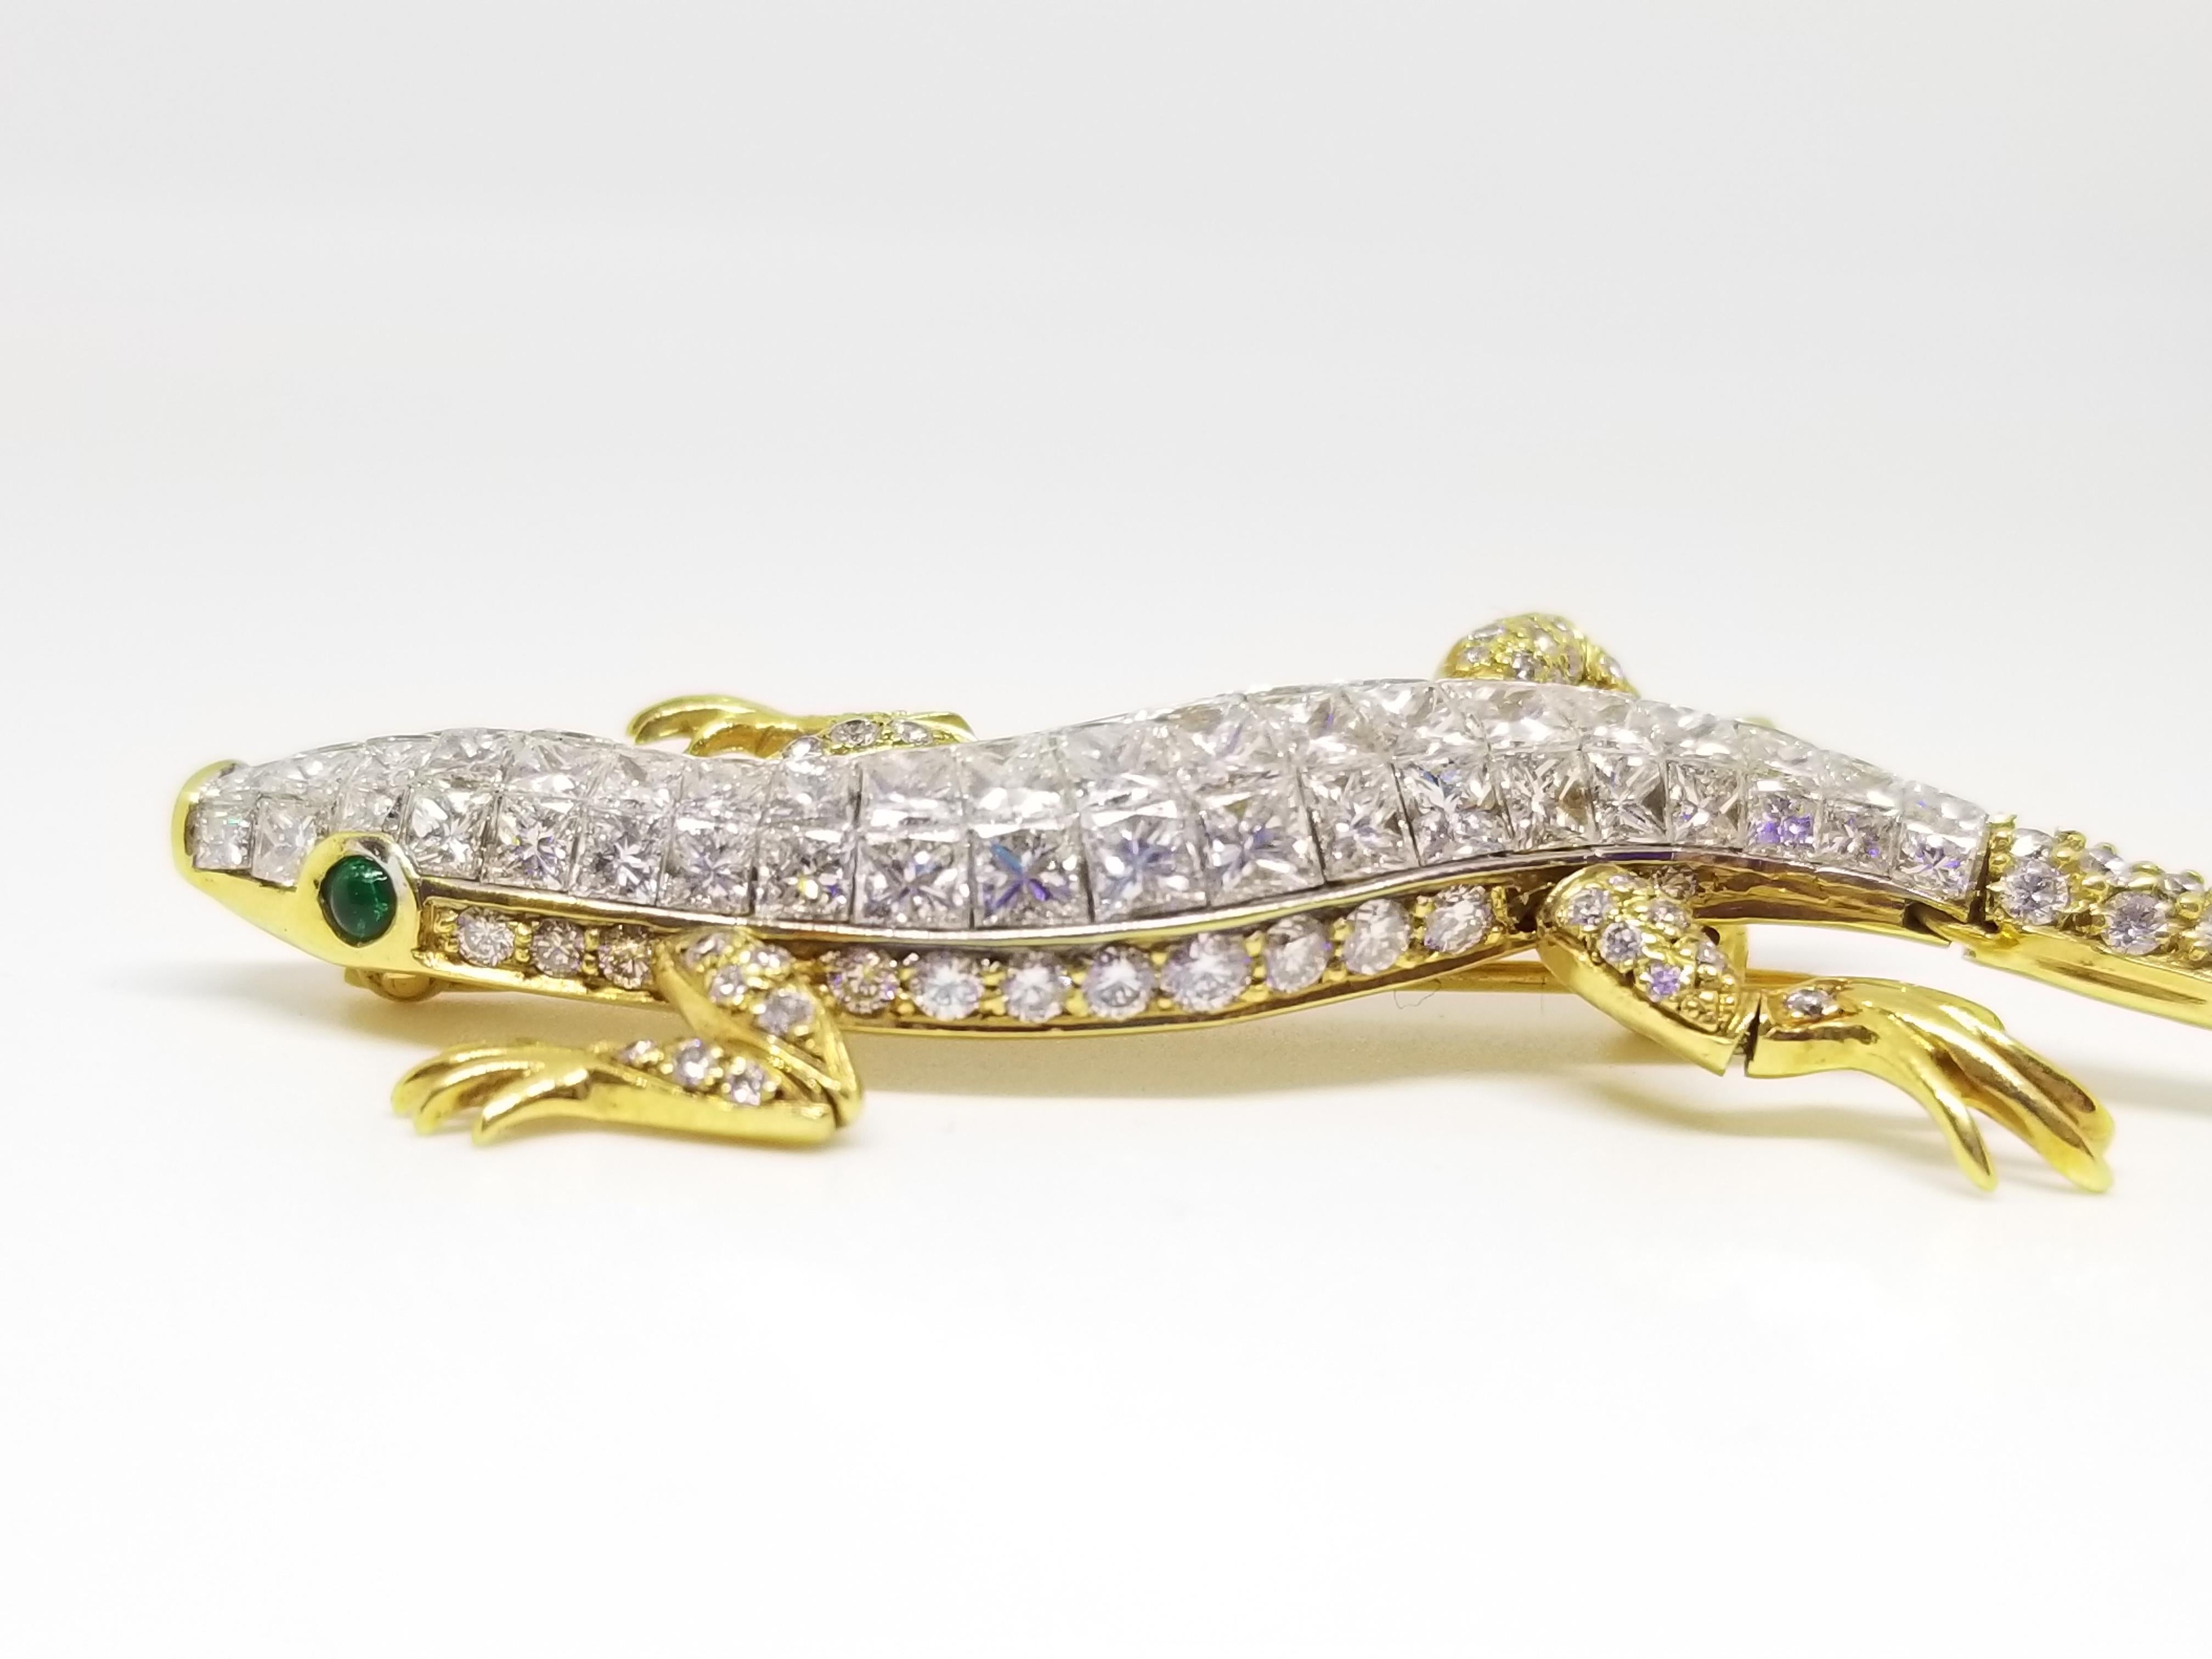 Tiffany & Co. (established 1837) Diamond Lizard Brooch with “en tremblant” limbs and tail. 20th century yellow gold, diamond, and gemstone. Private Collection.